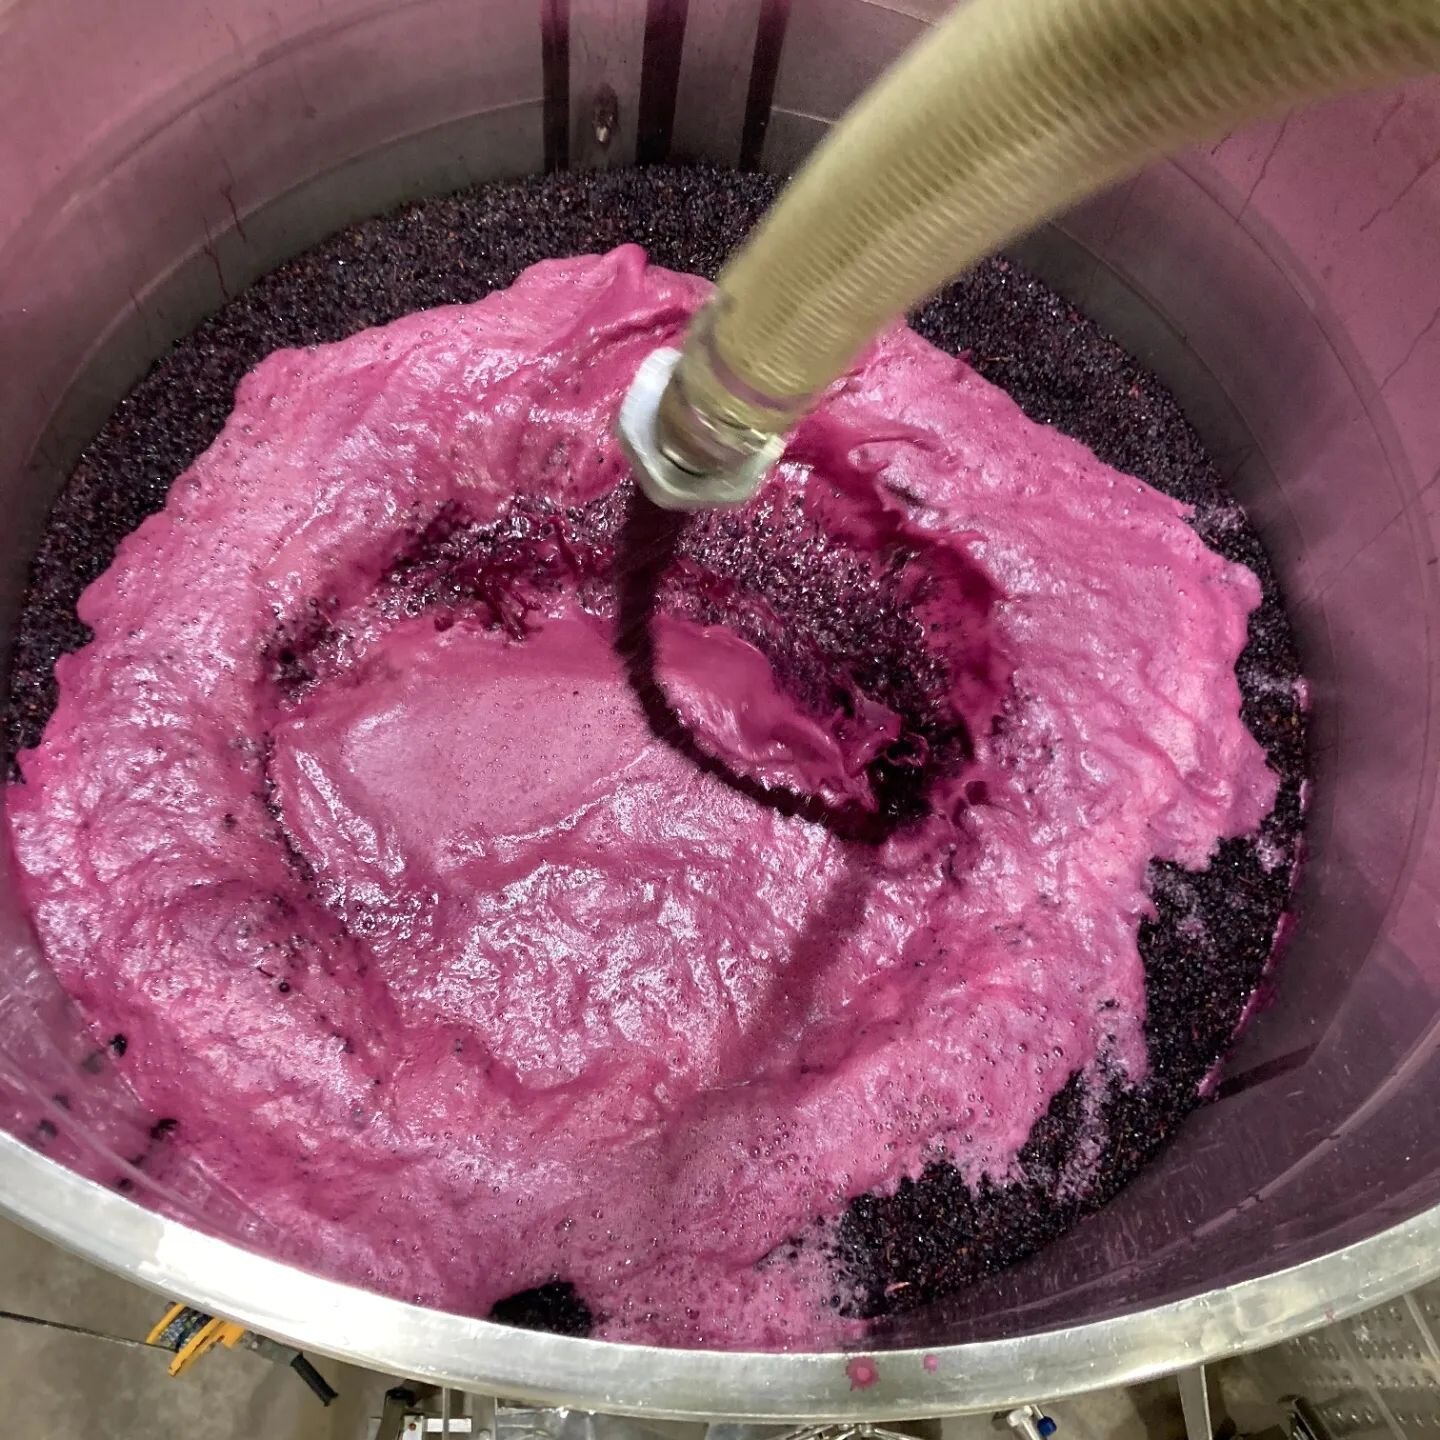 We are in for a treat! Pump over of our V24 Shiraz, which is showing intense purple colour and fruit flavours. Grapes were harvested early Thursday morning from our family vineyard in Gomersal, a subregion of the Barossa Valley. 

#mecklenwines #west